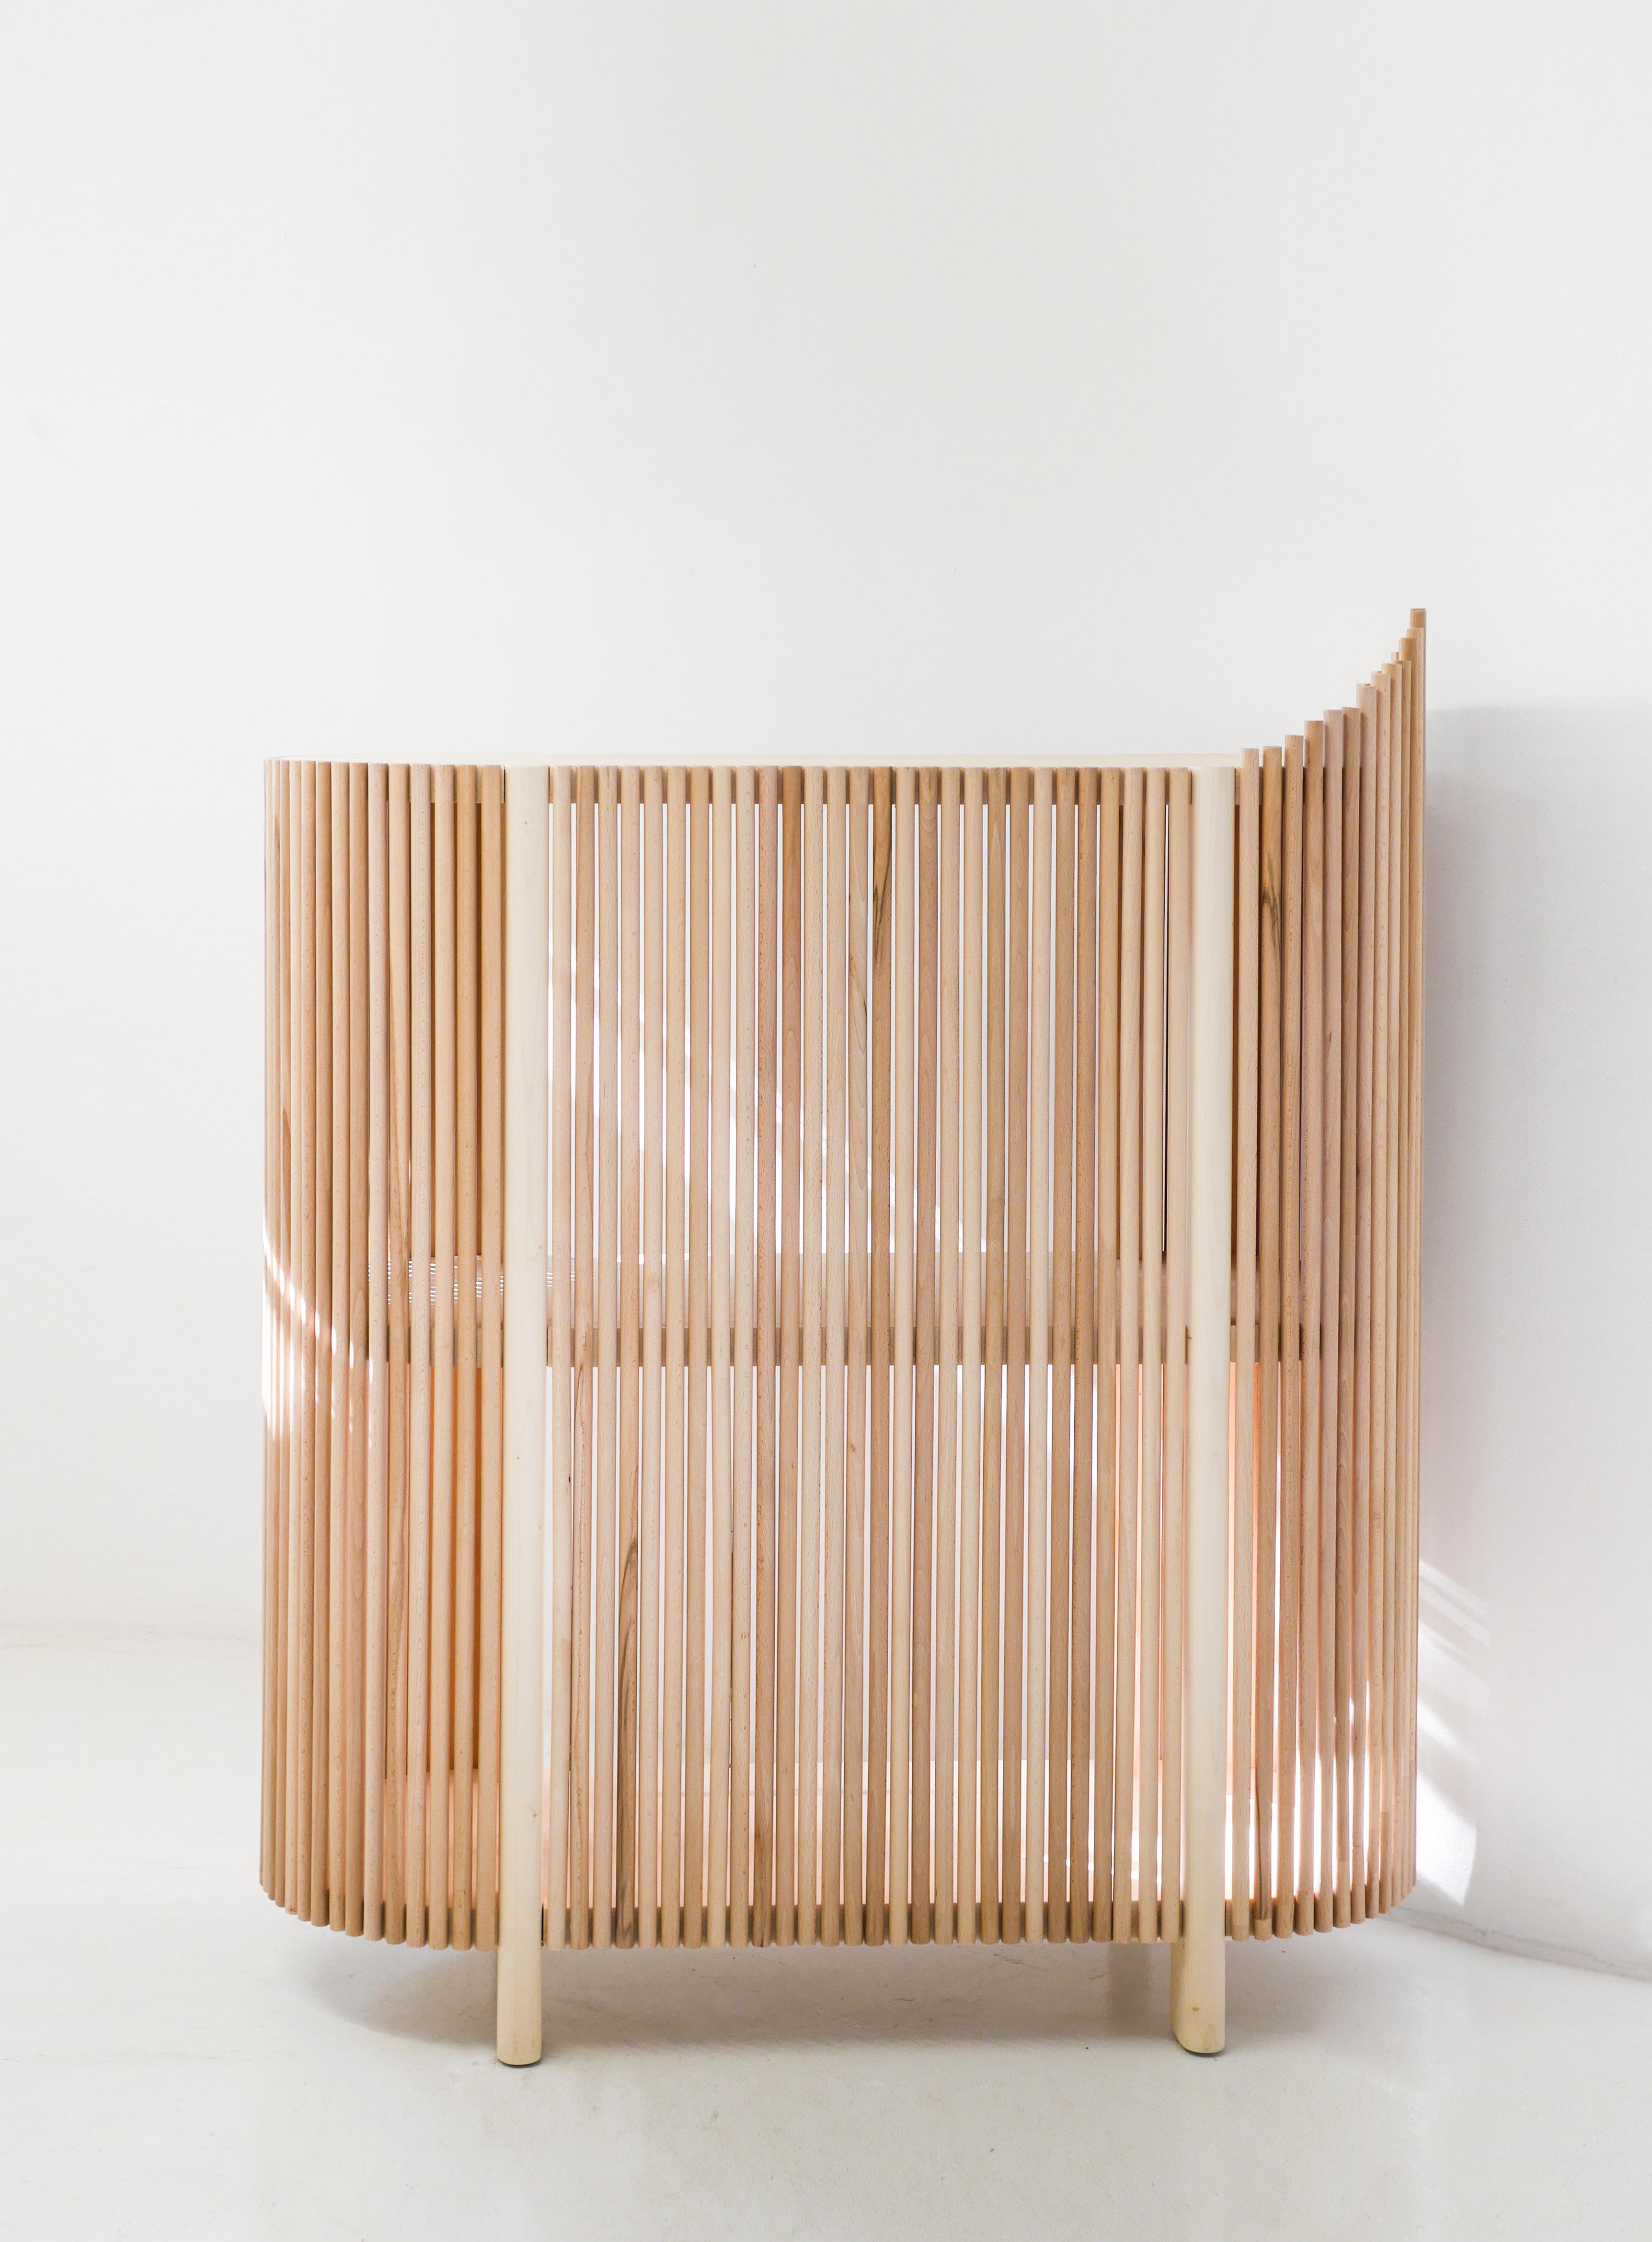 Beech Roseaux Bar Table by Alexandre Labruyère 
Current Production
Dimensions: W 100 x D 40 x H 110 cm
Materials: Sycamore, Beech, Natural Oil Protection.

All furniture is made to order and made to measure. In line with its natural